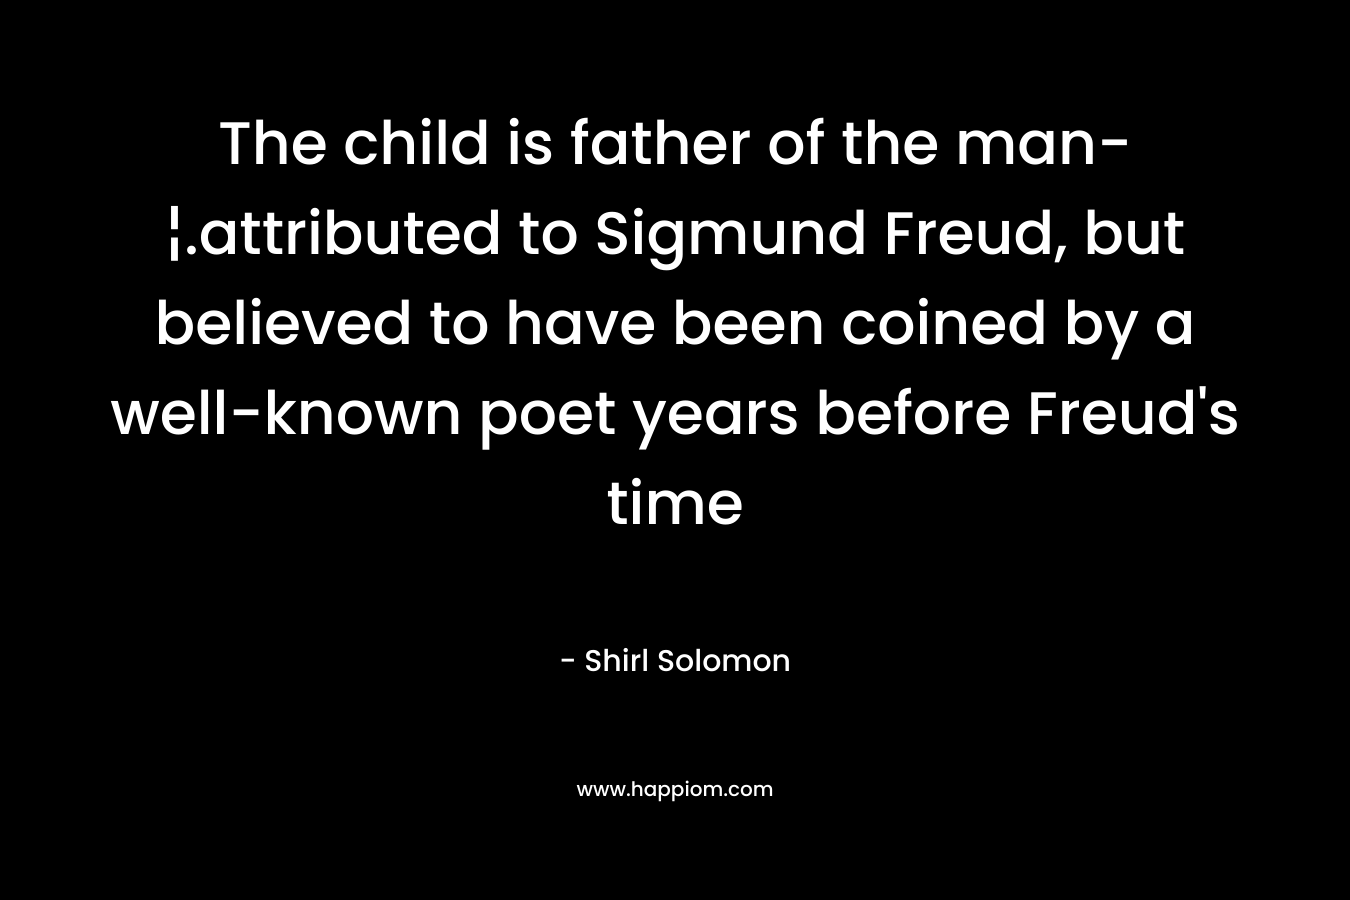 The child is father of the man-¦.attributed to Sigmund Freud, but believed to have been coined by a well-known poet years before Freud’s time – Shirl Solomon